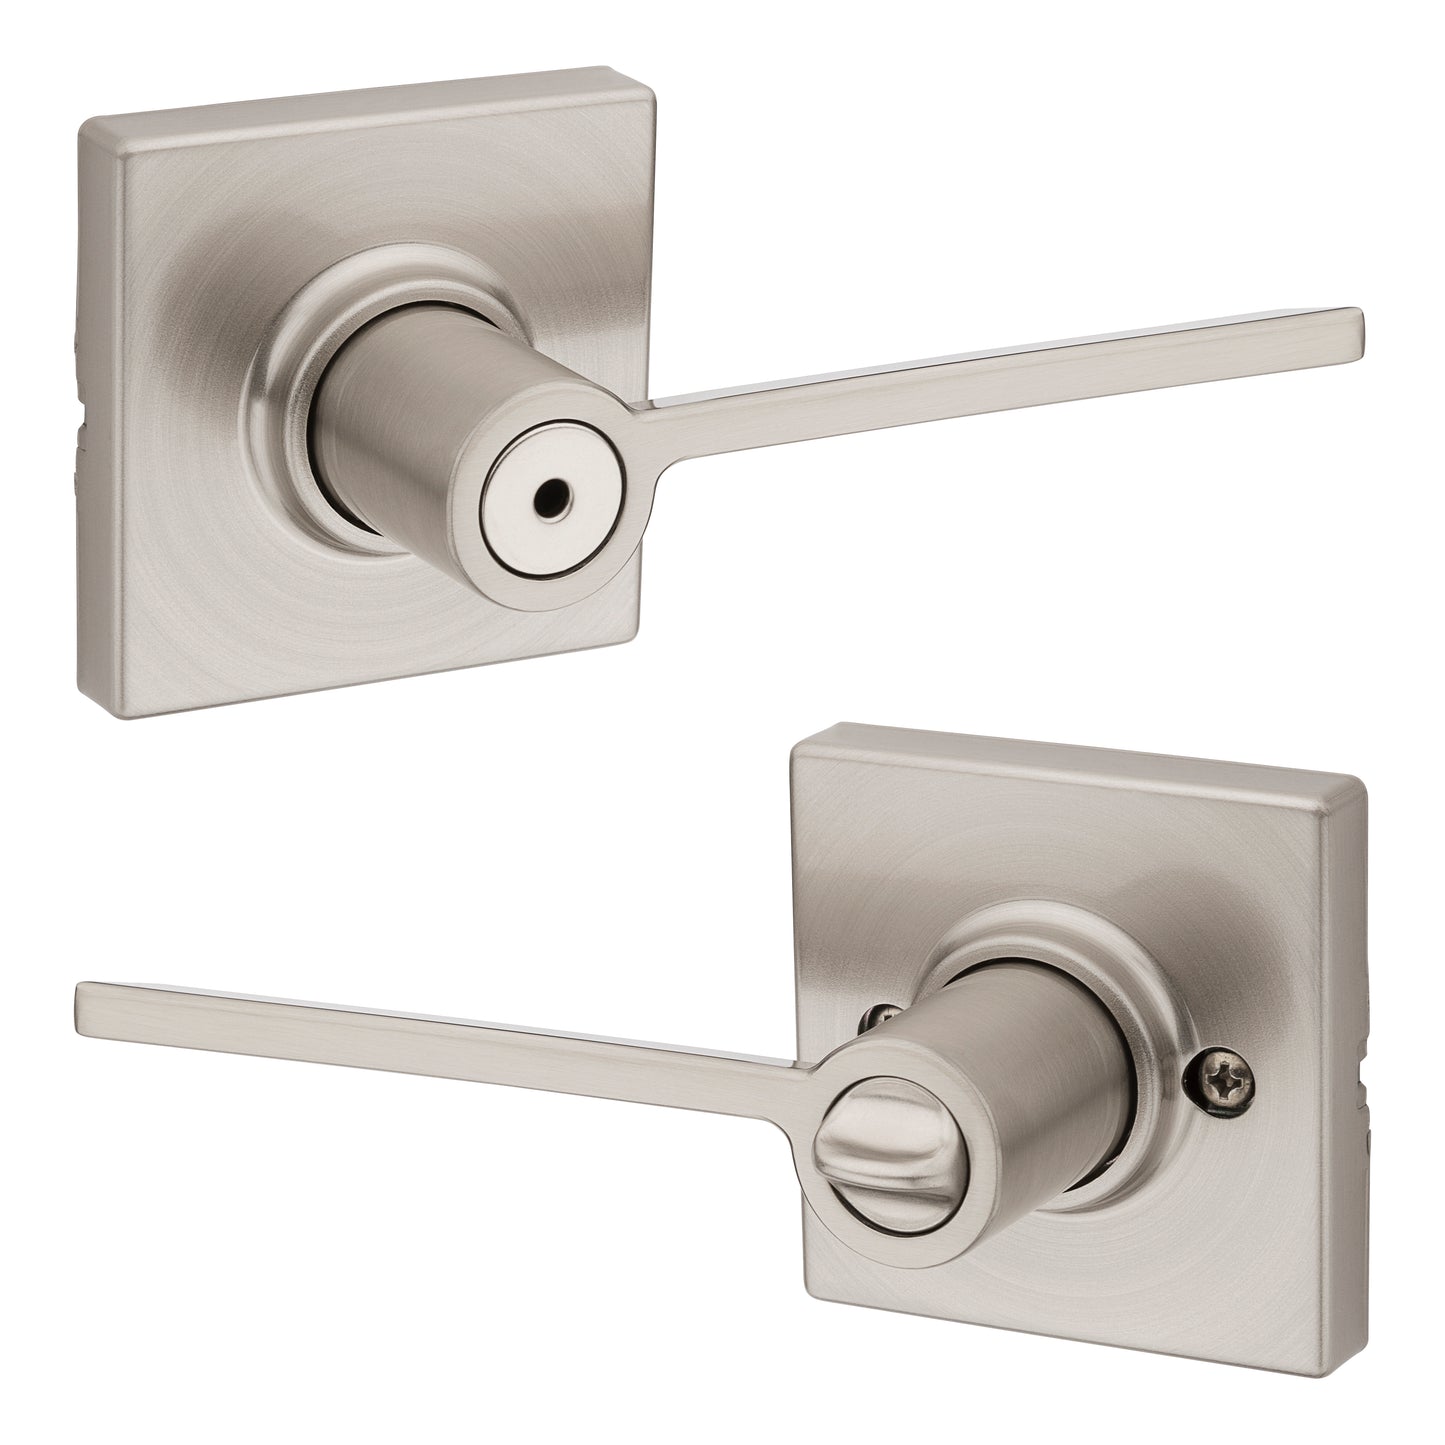 Kwikset 300LRLSQT-15 Ladera Lever with Square Rose Privacy Door Lock with 6AL Latch and RCS Strike Satin Nickel Finish